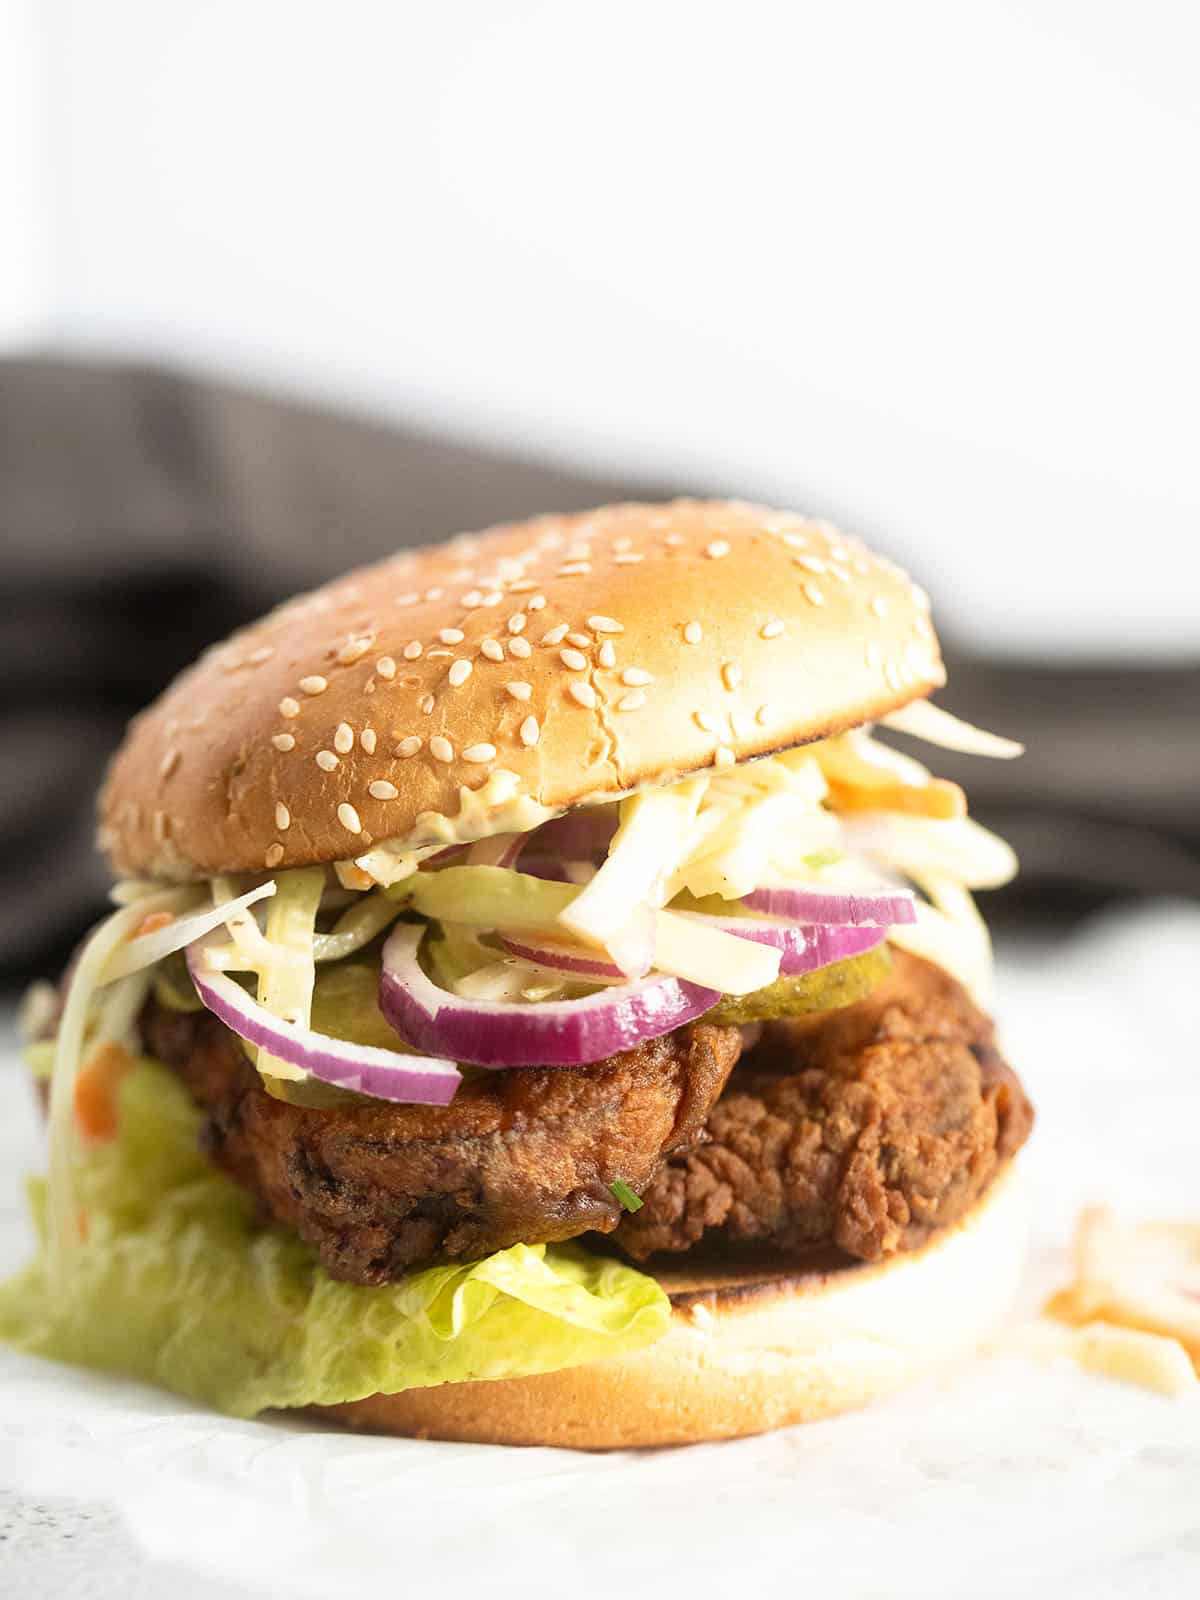 crispy chicken burger made with schnitzel and coleslaw.